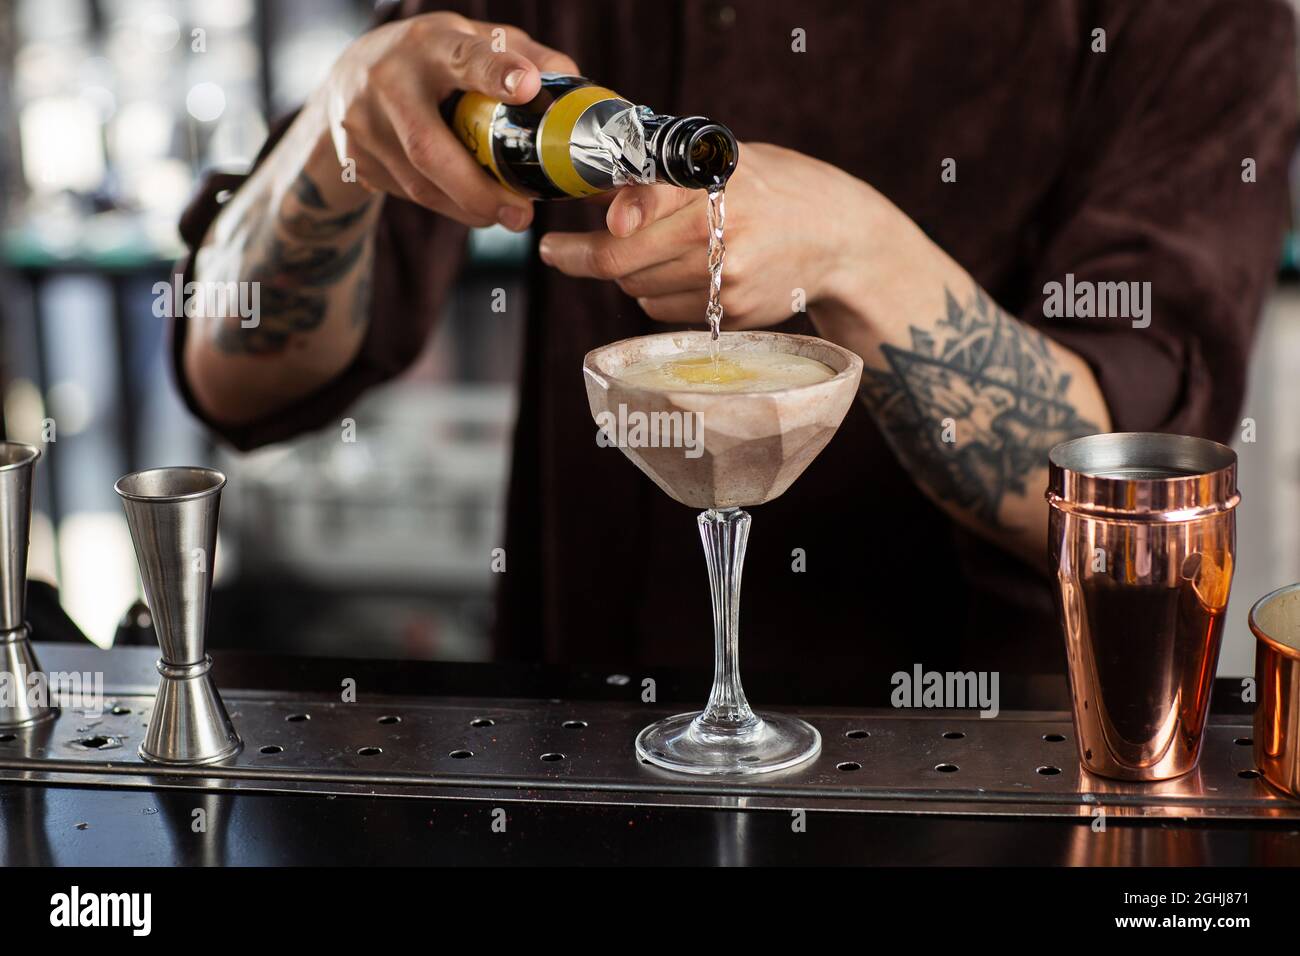 https://c8.alamy.com/comp/2GHJ871/male-bartender-pouring-to-the-measuring-glass-cup-with-ice-cubes-an-alcoholic-drink-from-steel-jigger-on-the-bar-counter-on-the-blurred-background-2GHJ871.jpg